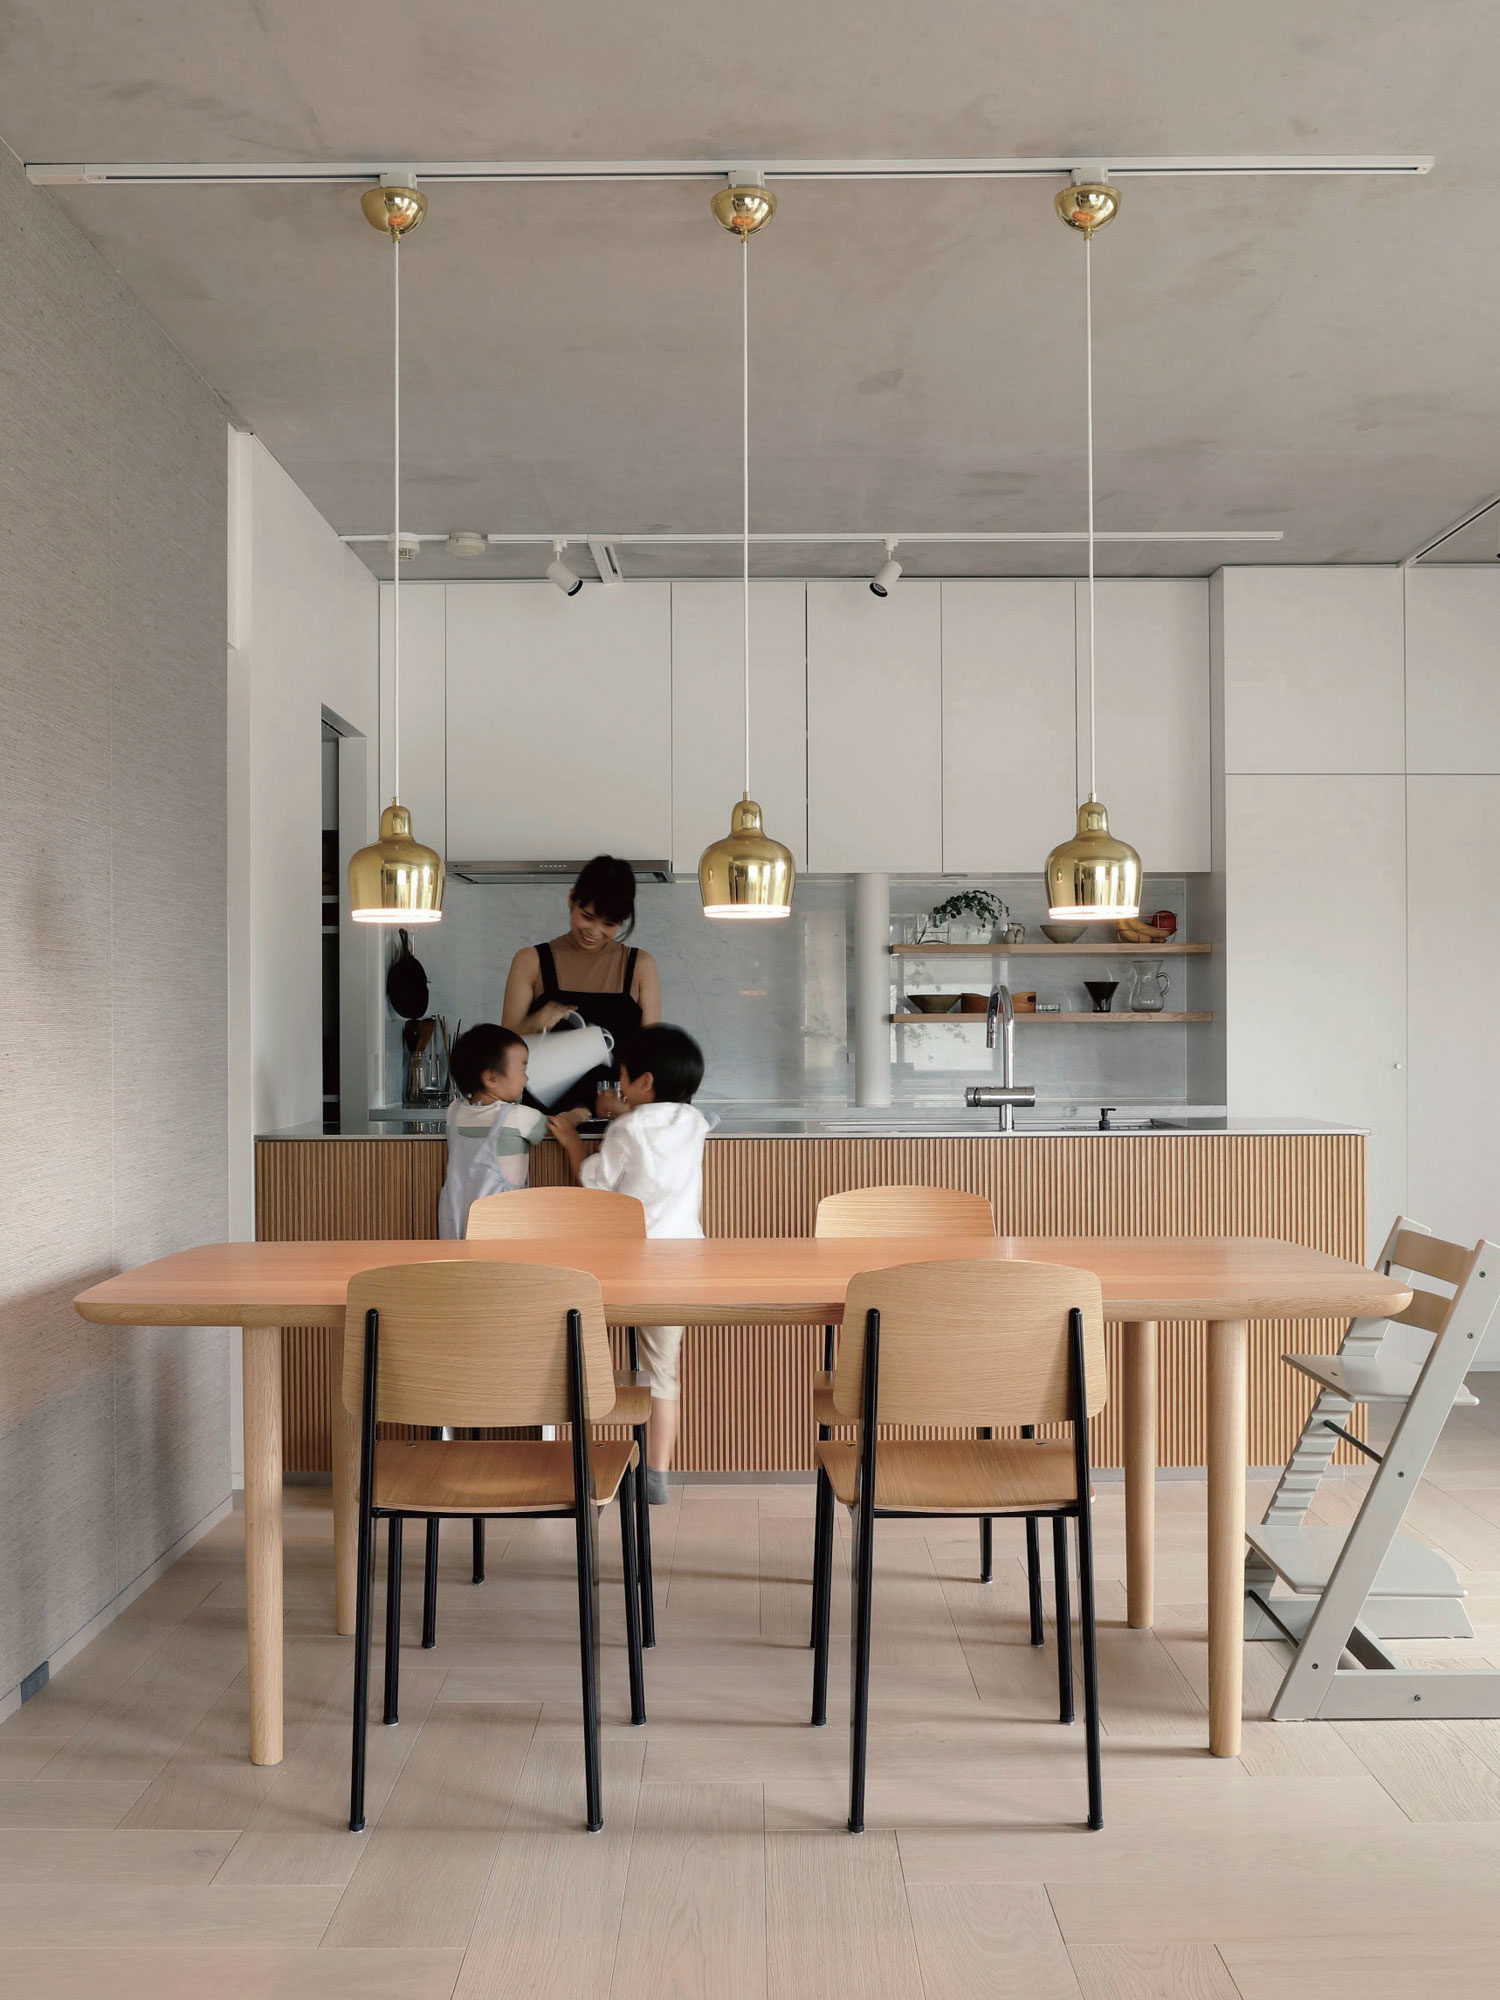 House Living in the Gallery in Tokyo, Japan by R.E.A.D. & Architects